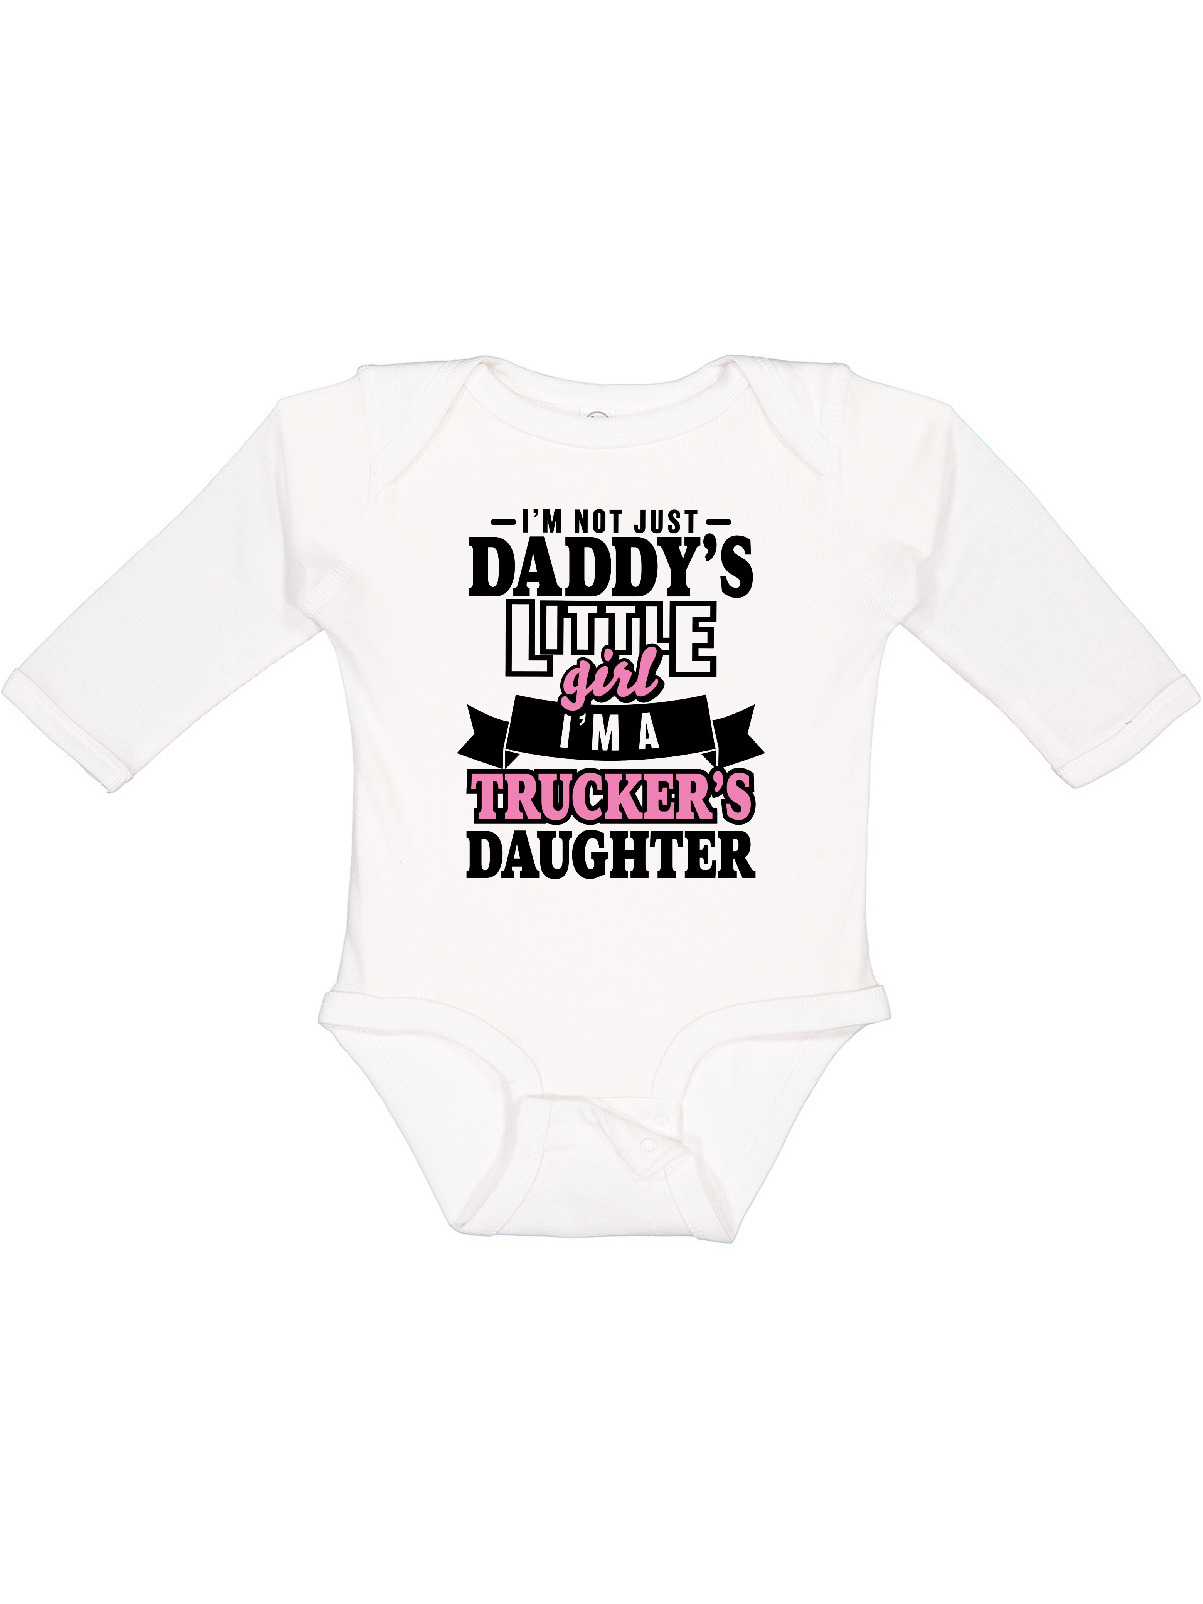 Inktastic Im Not Just Daddys Little Im a Truckers Daughter Girls Long Sleeve Baby Bodysuit - image 1 of 4